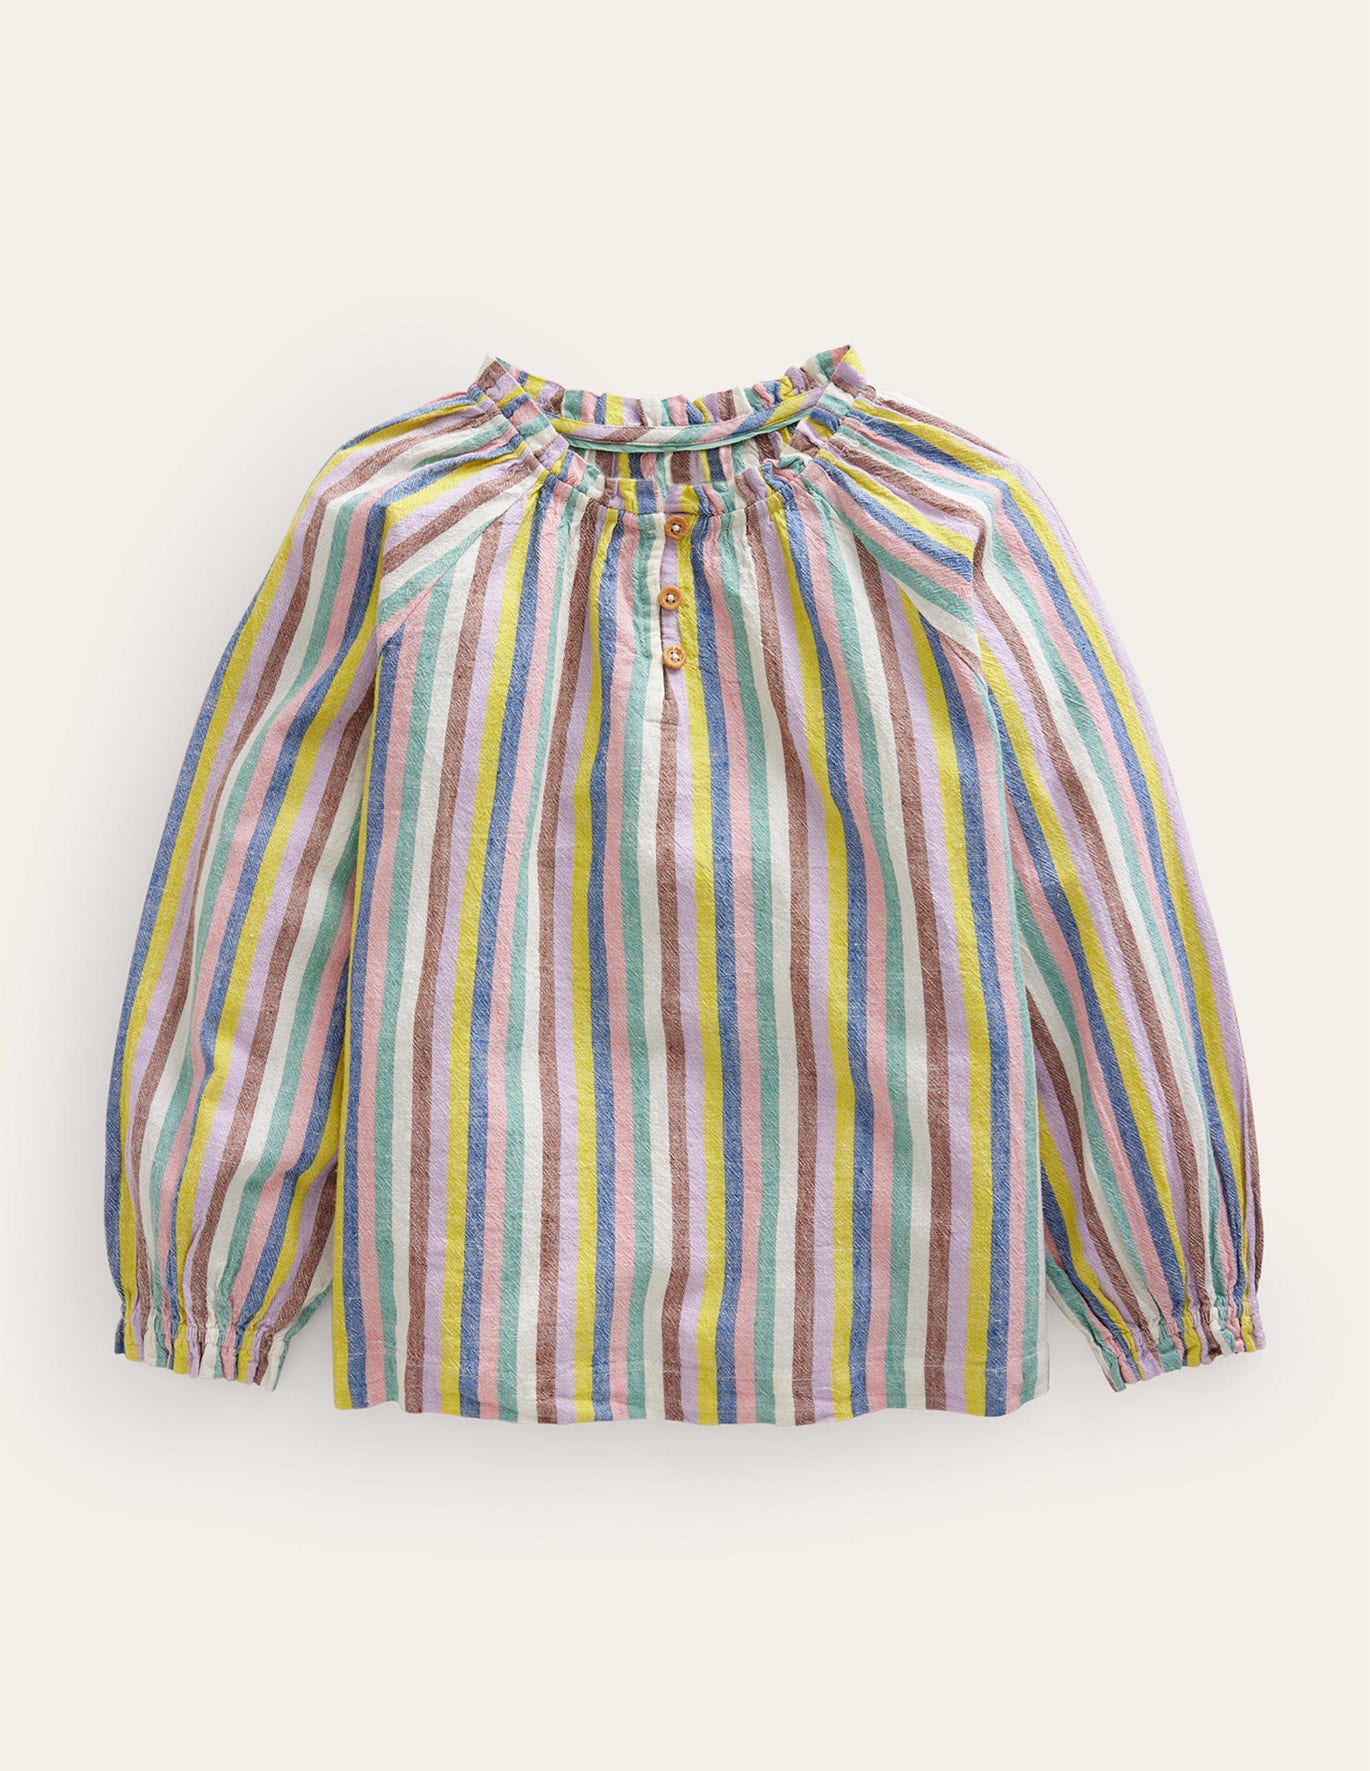 Boden Raglan Striped Blouse - Brown and Lilac Rainbow